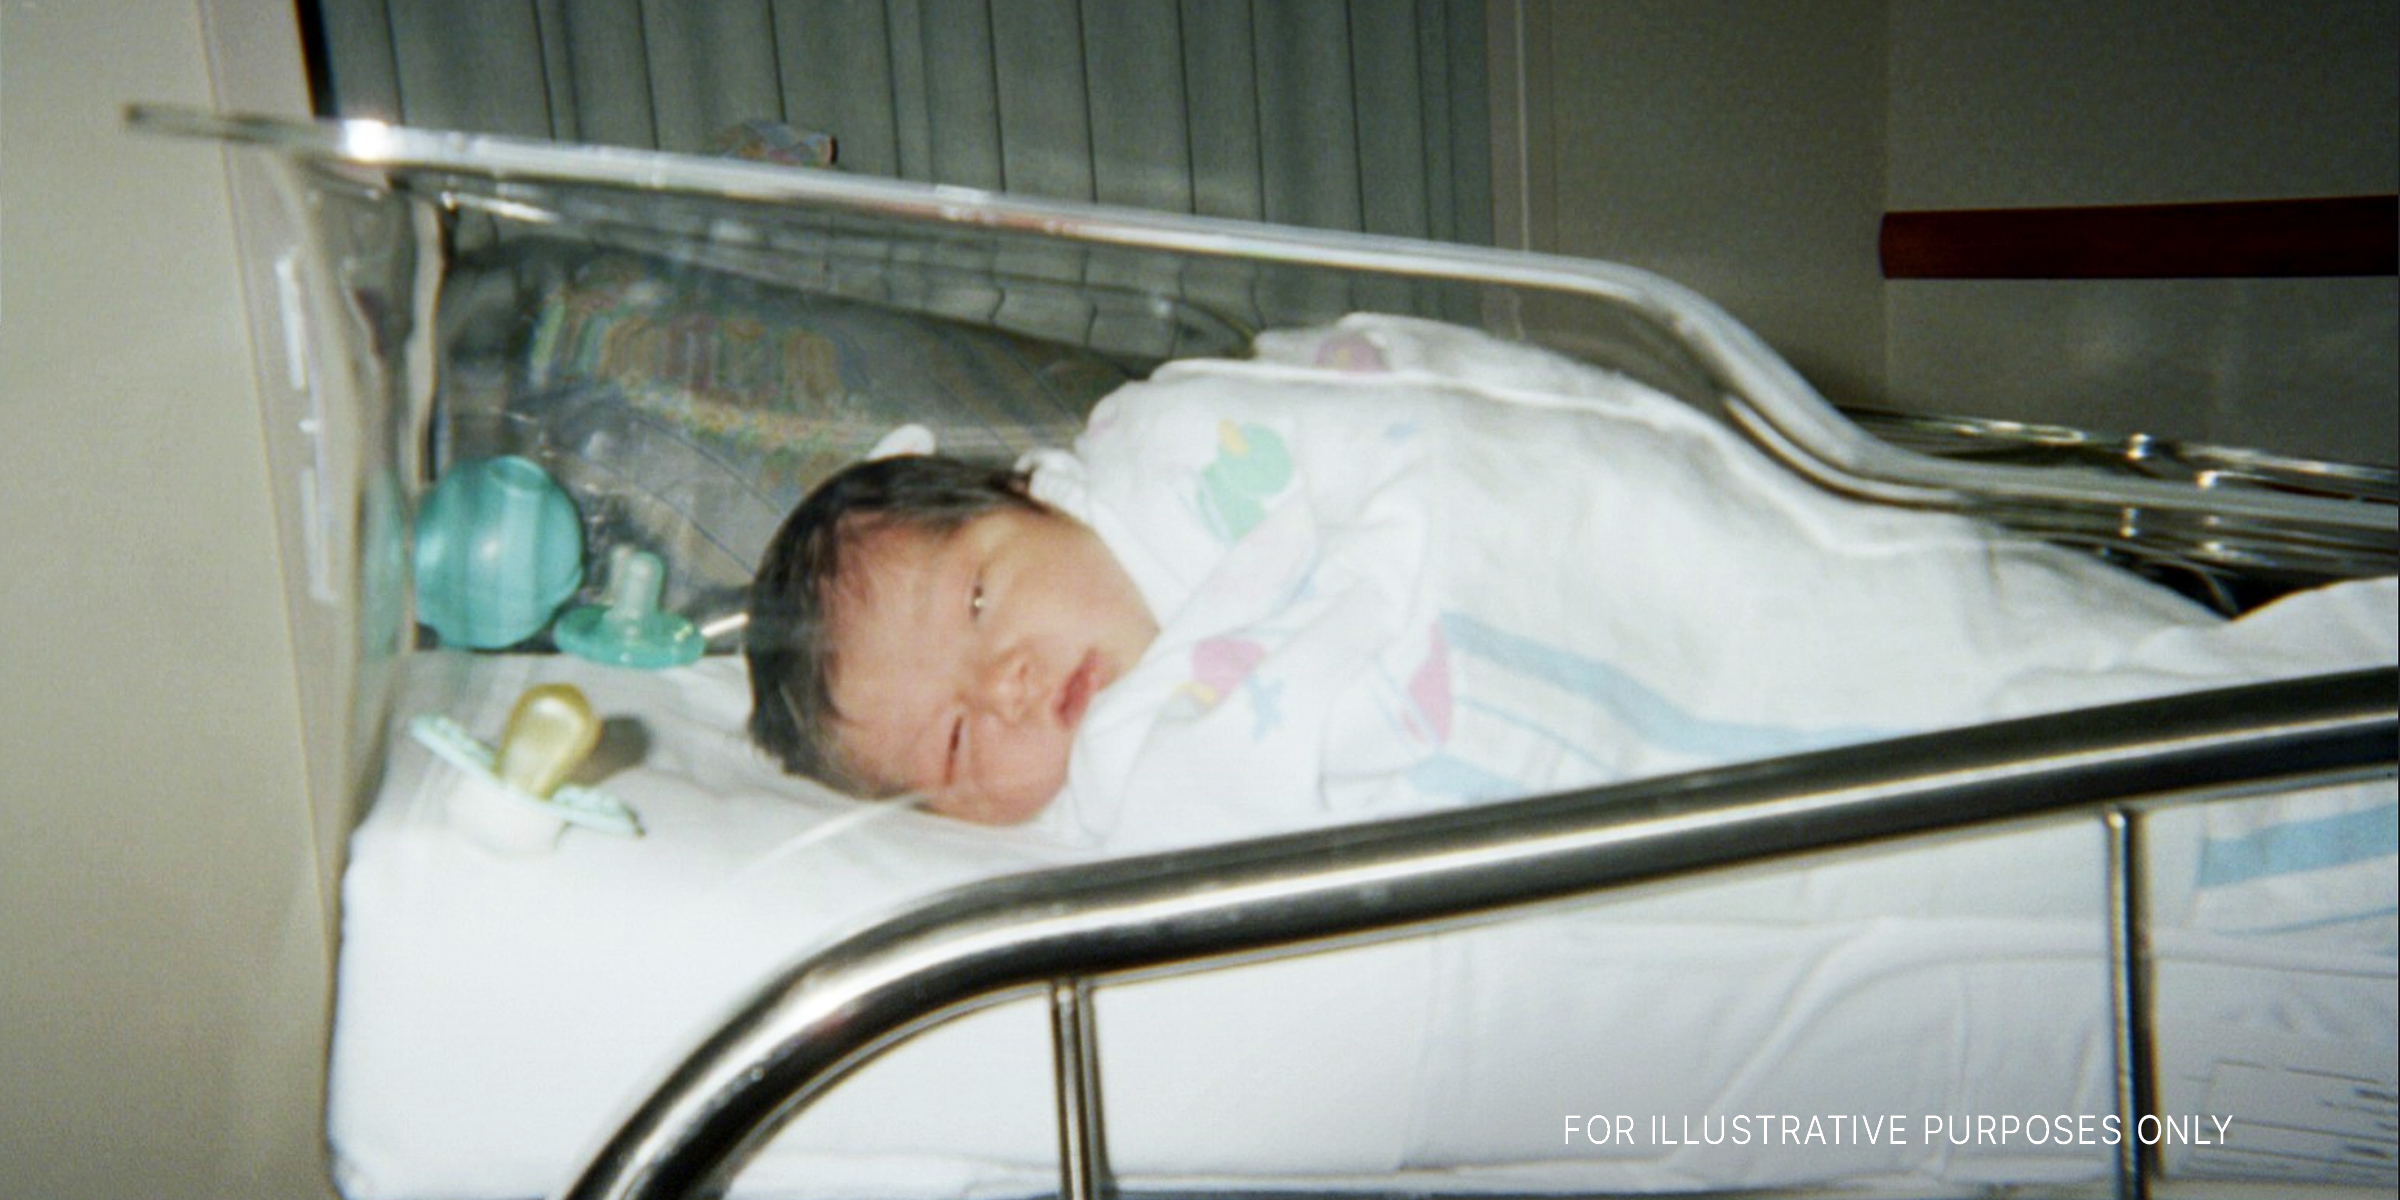 A newborn baby with black hair | Source: Flickr/Nadia Santoyo/(CC BY 2.0)